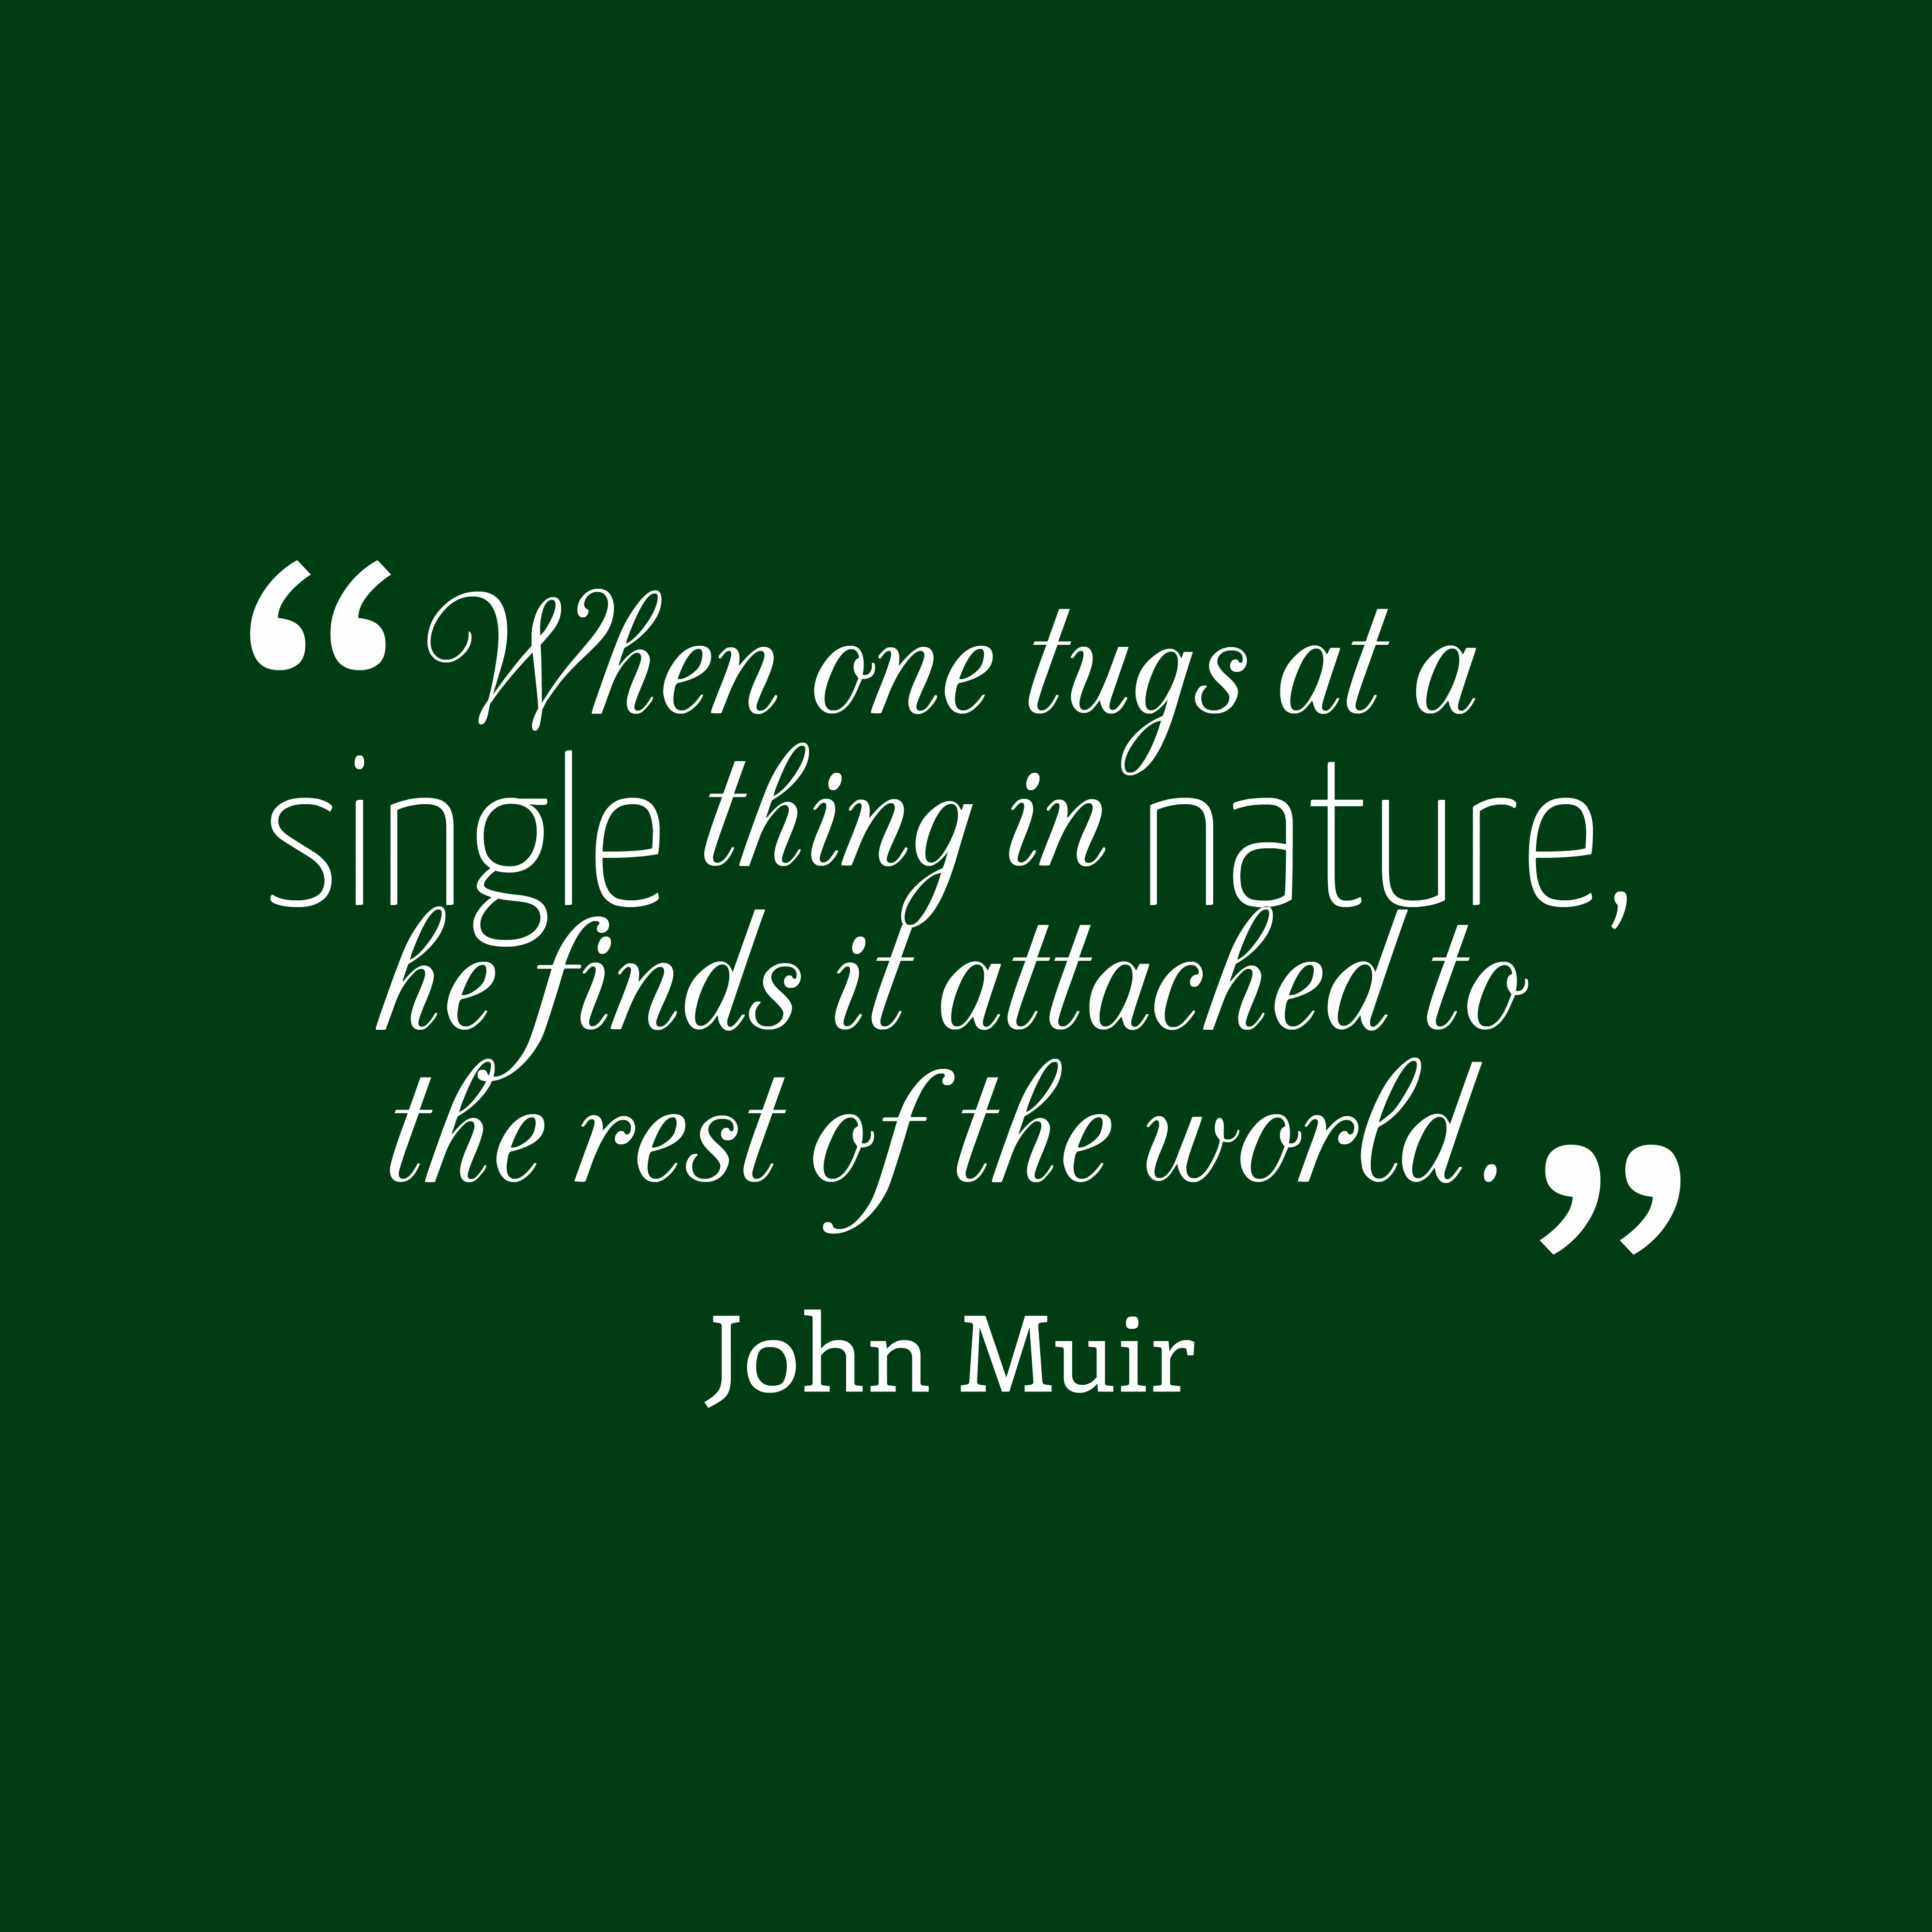 When one tugs at a single thing in nature, he finds it attached to the rest of the world.john muir